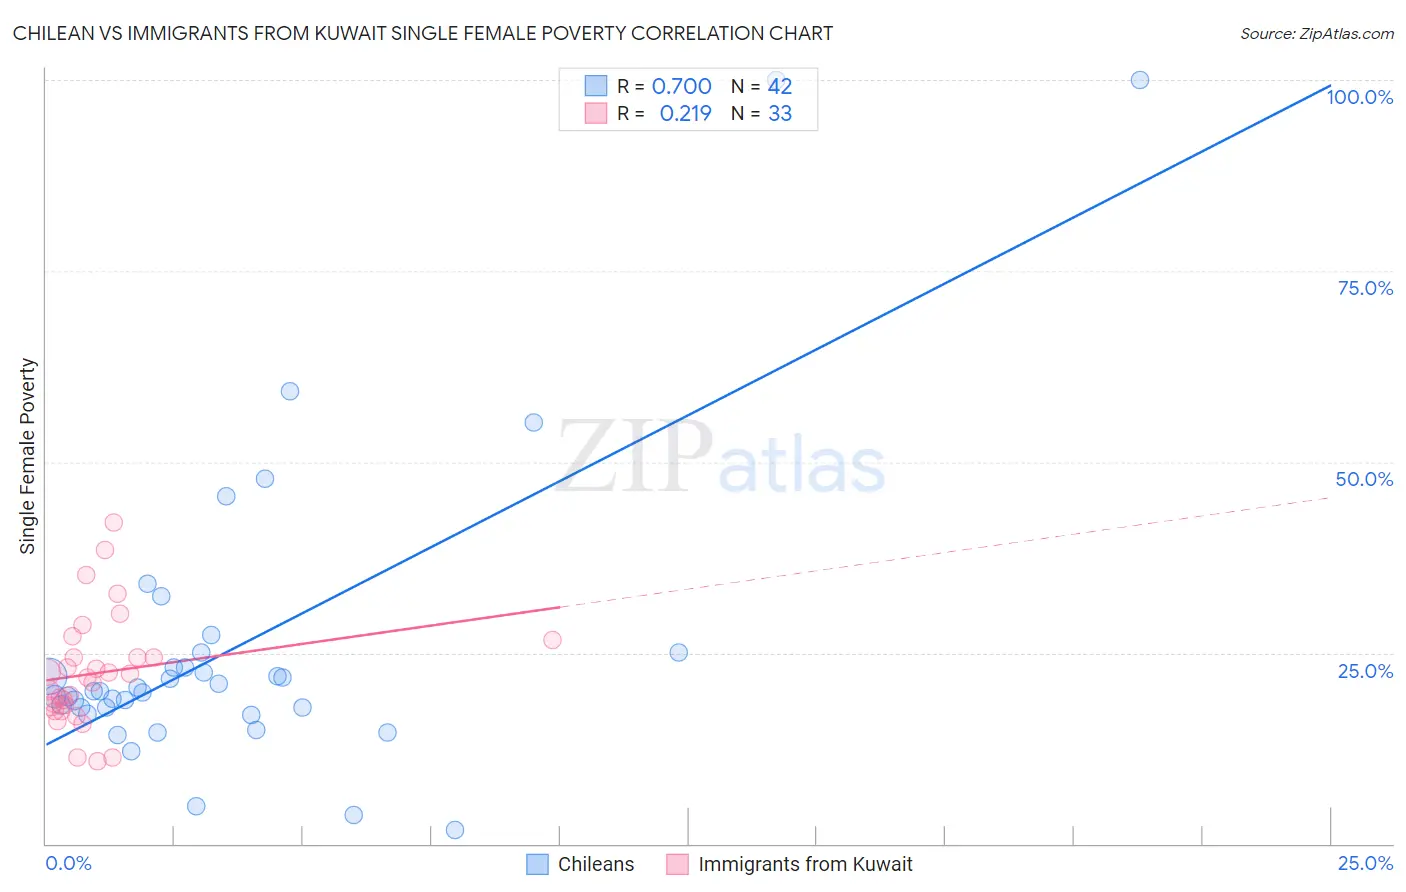 Chilean vs Immigrants from Kuwait Single Female Poverty